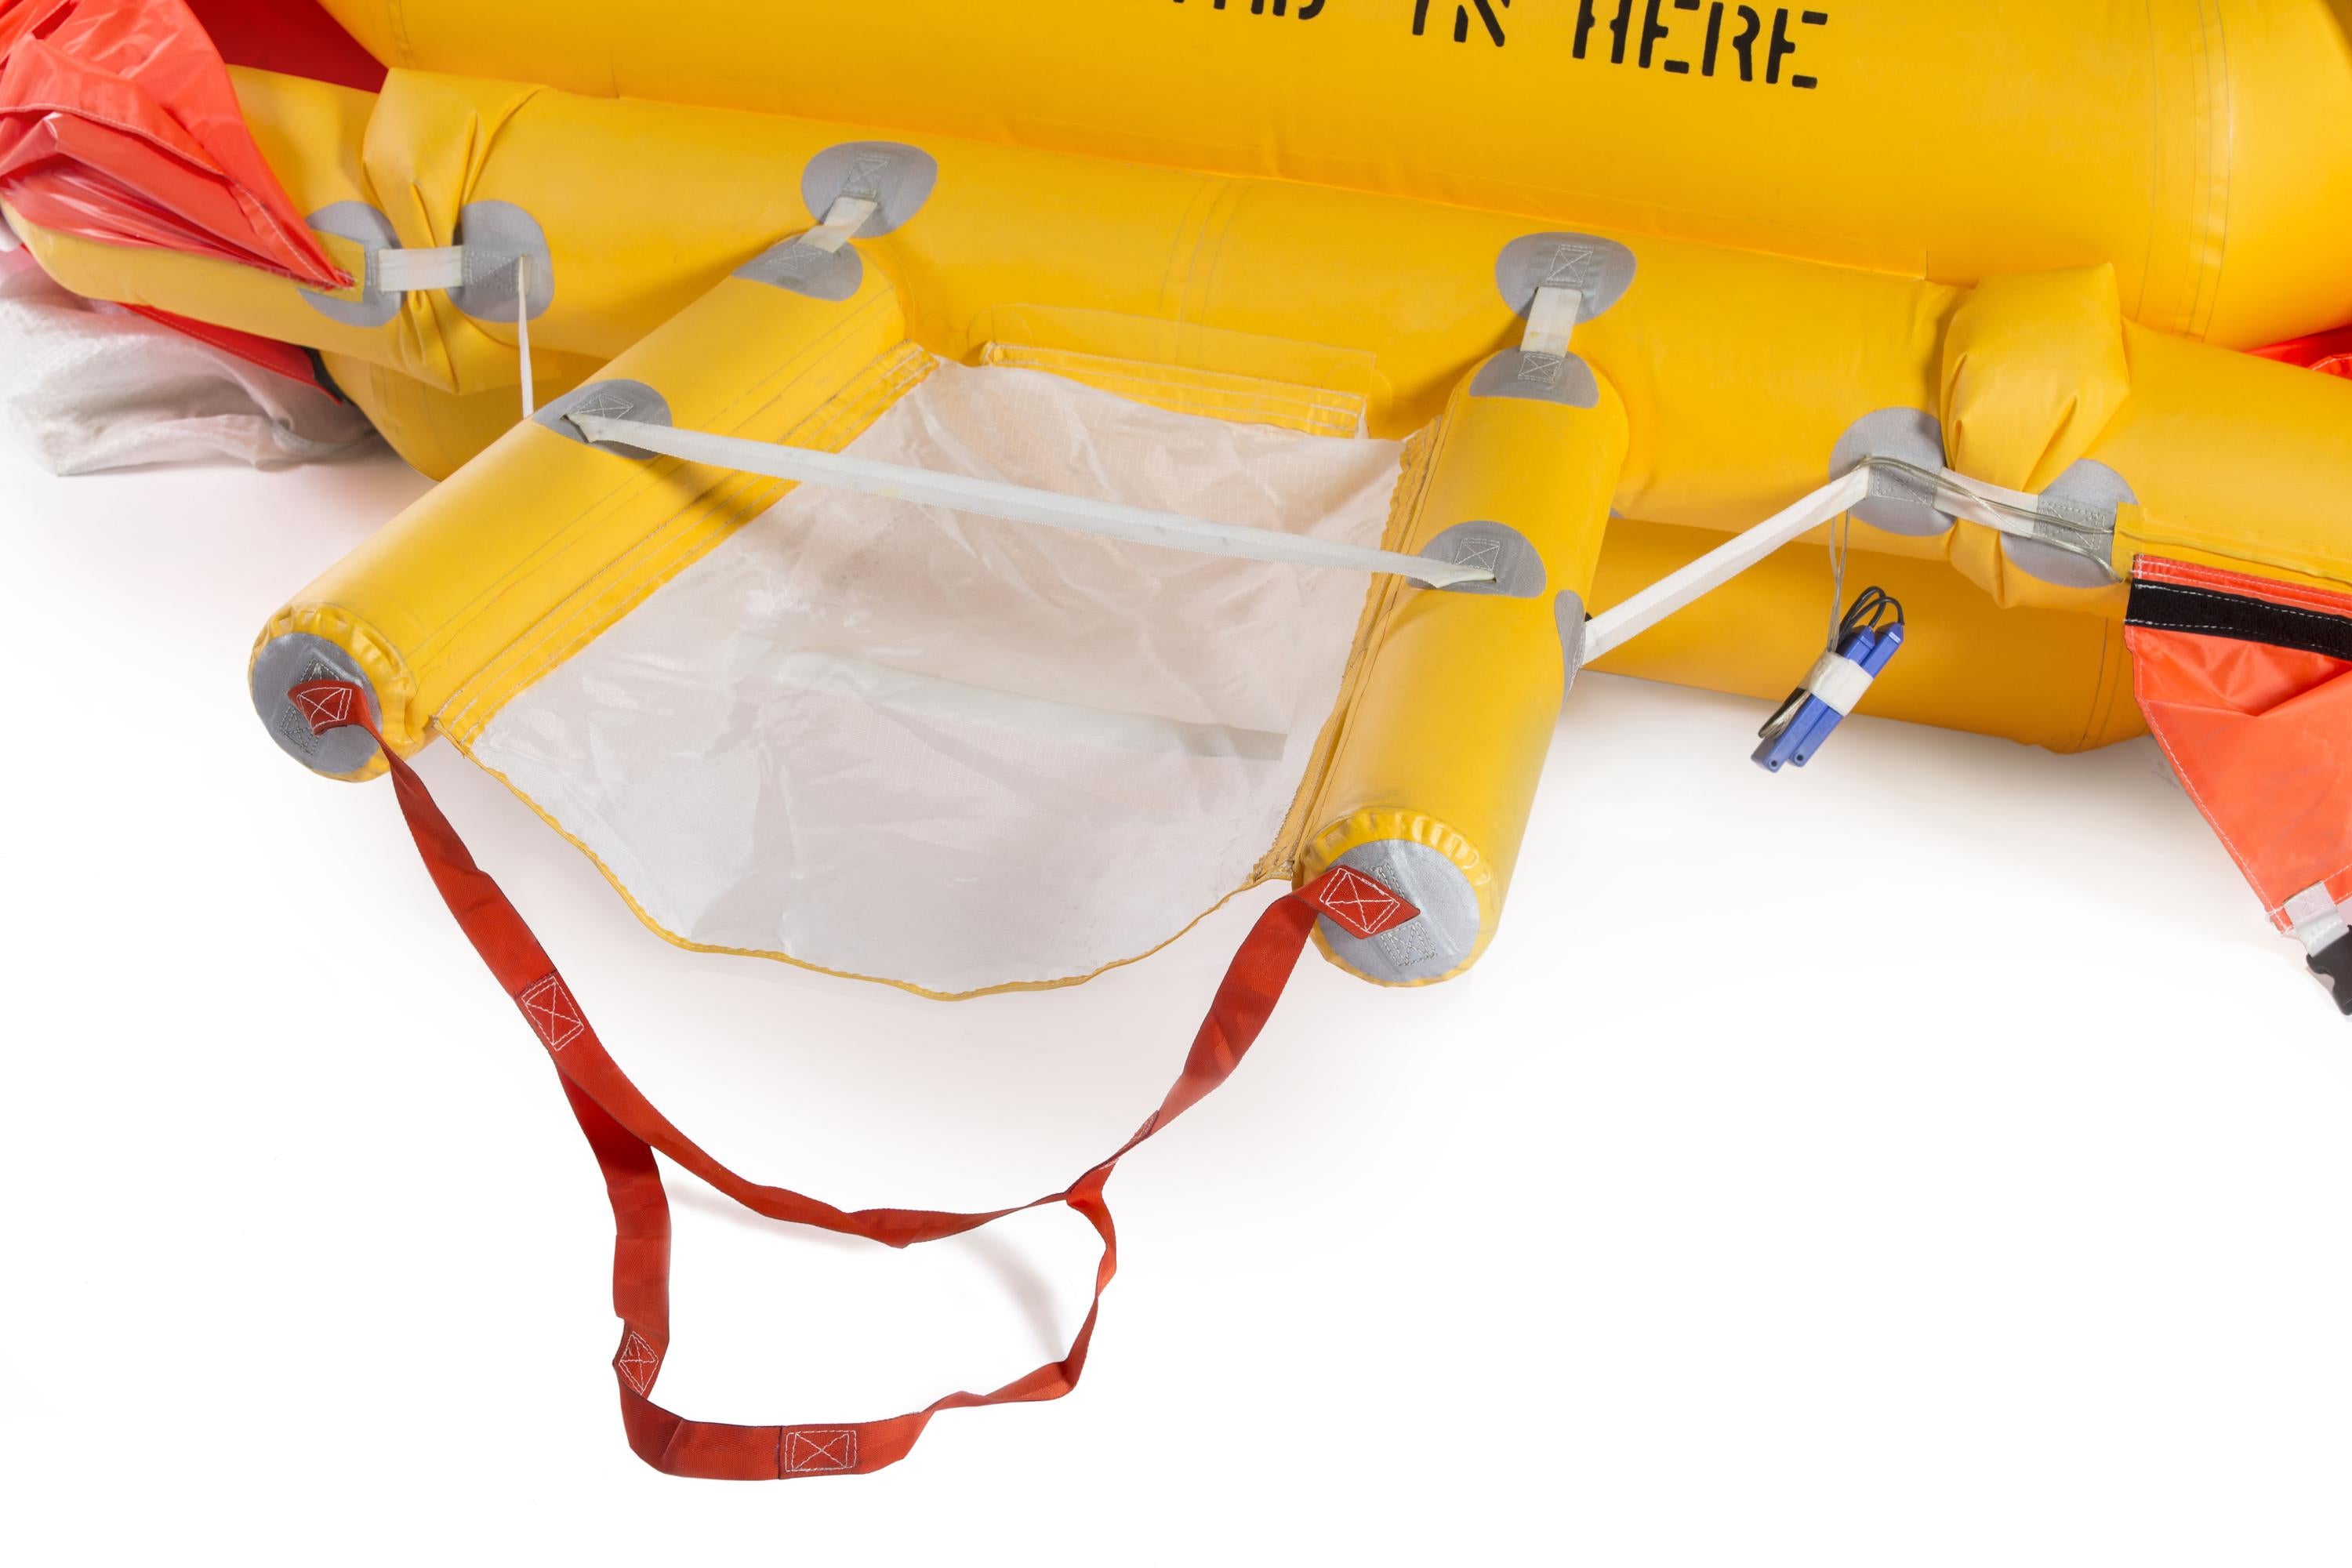 412 replacement mid-float with liferafts